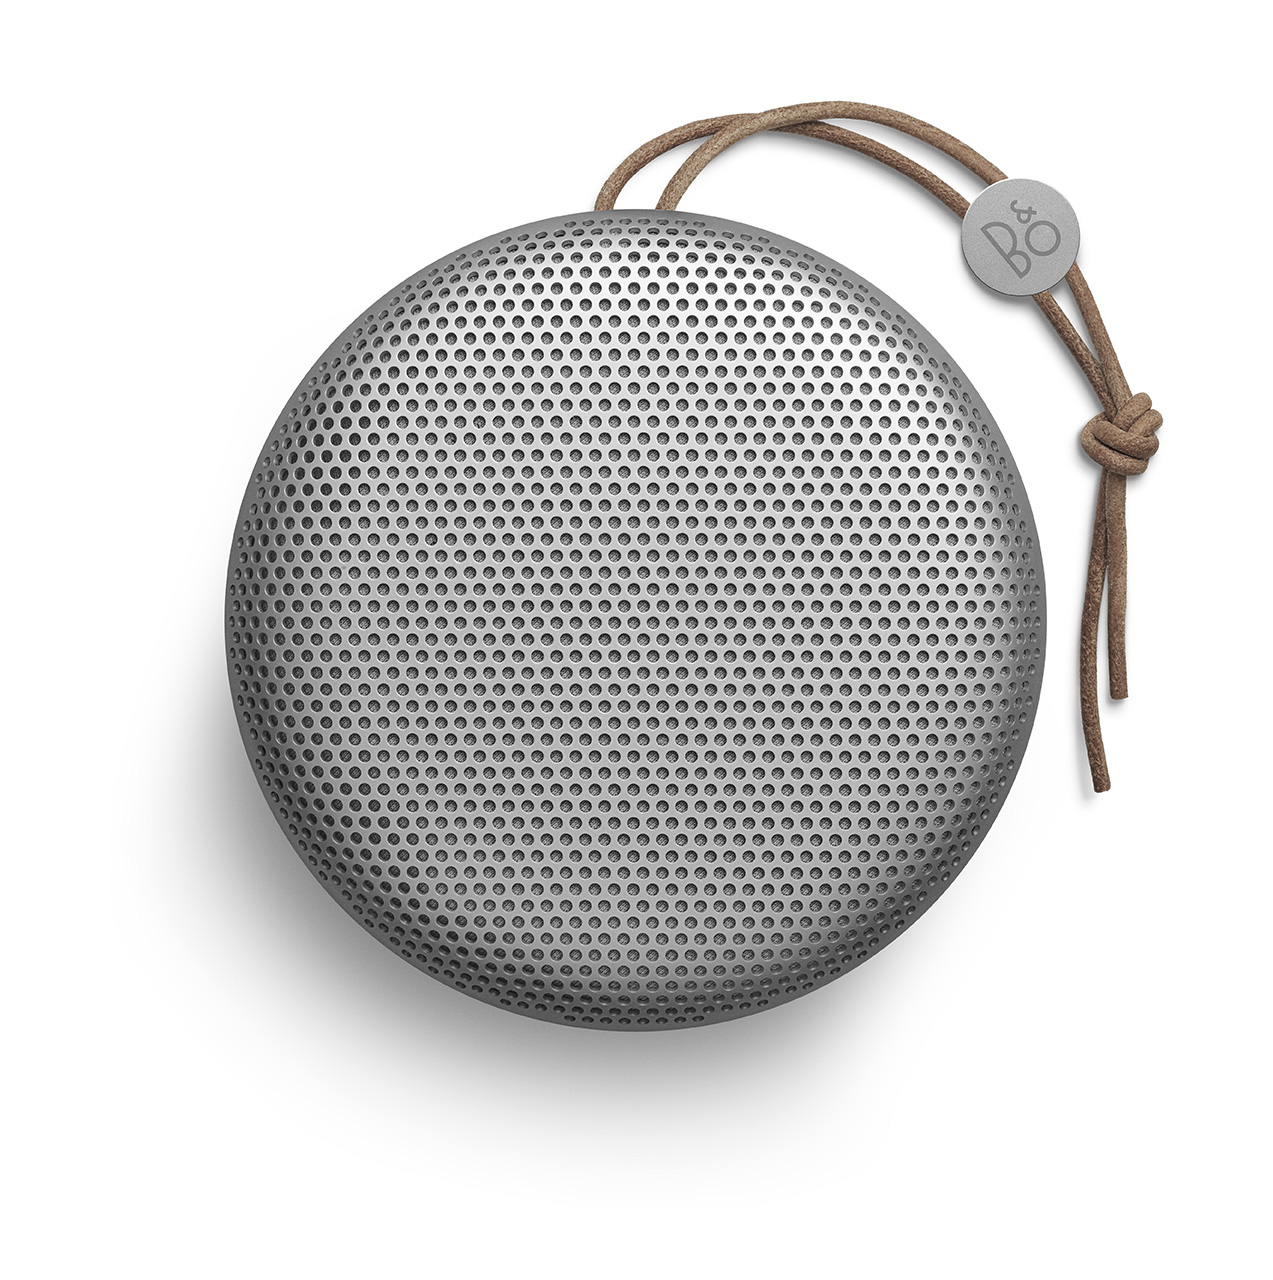 The B&O Play Beoplay A1 Goes Where No Bang & Olufsen Has Gone Before